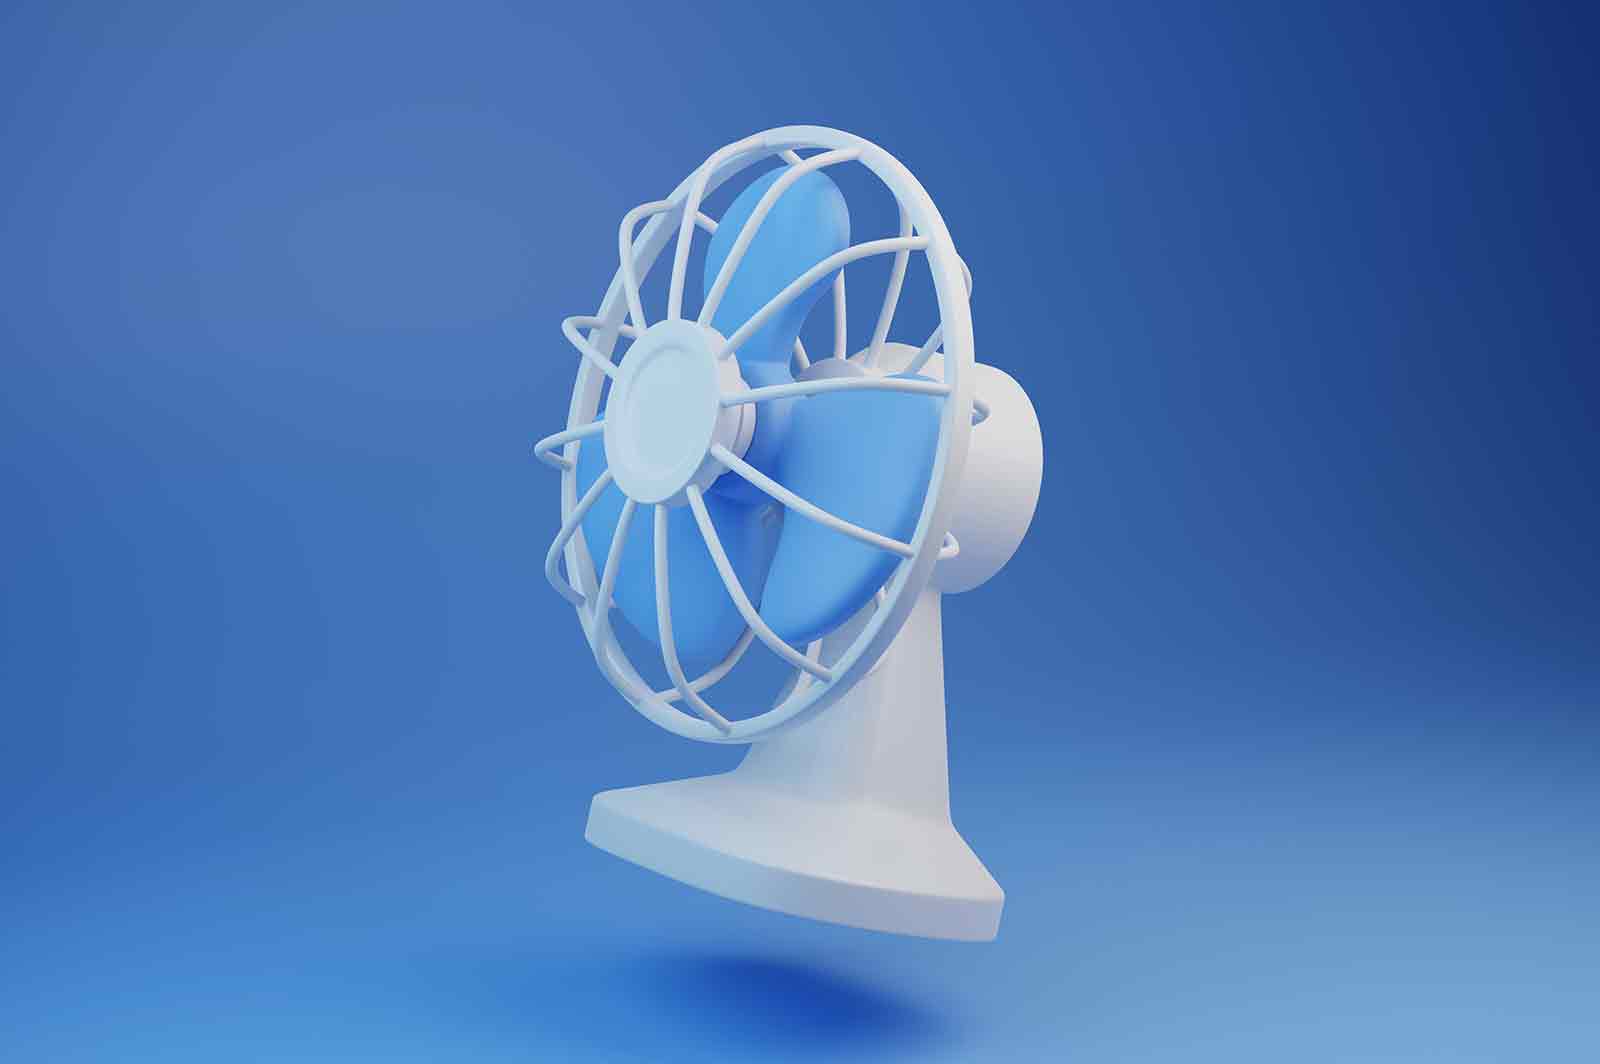 Electric desk fan device 3d rendered illustration. Home climate equipment. Air cooling fan. Home appliances and tools concept